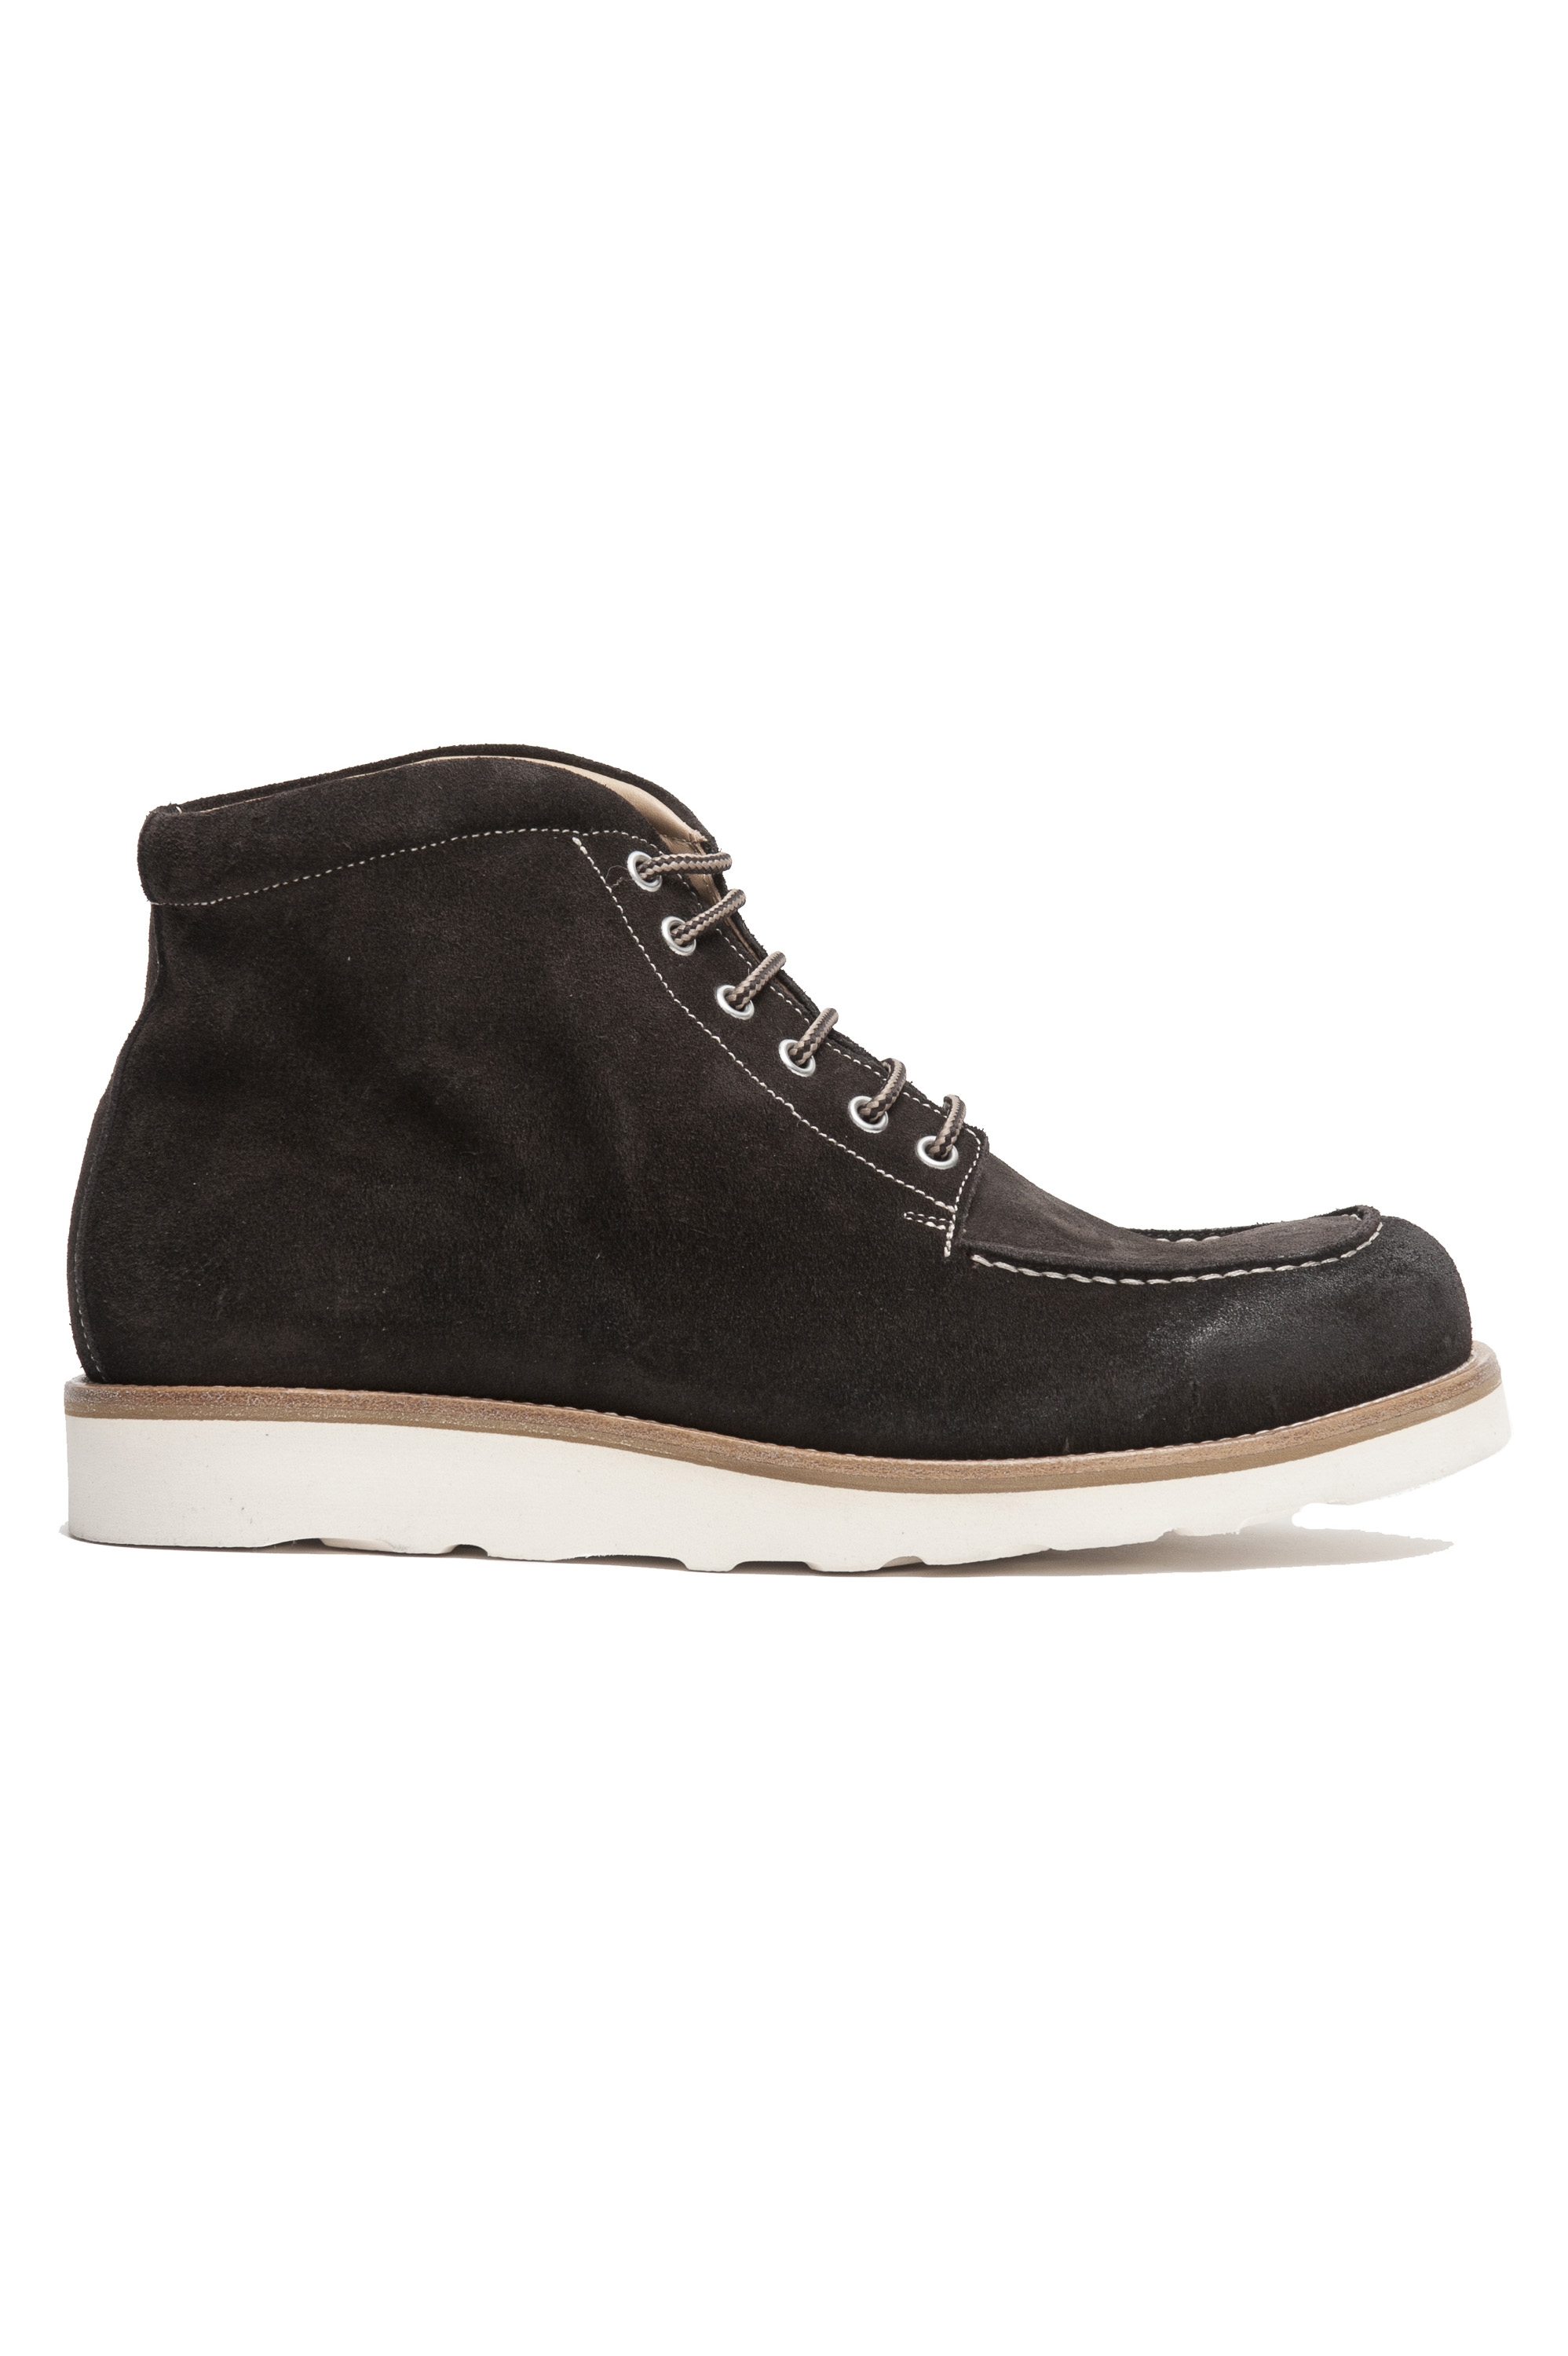 SBU 02964_2020AW High top work boots in brown suede leather 01